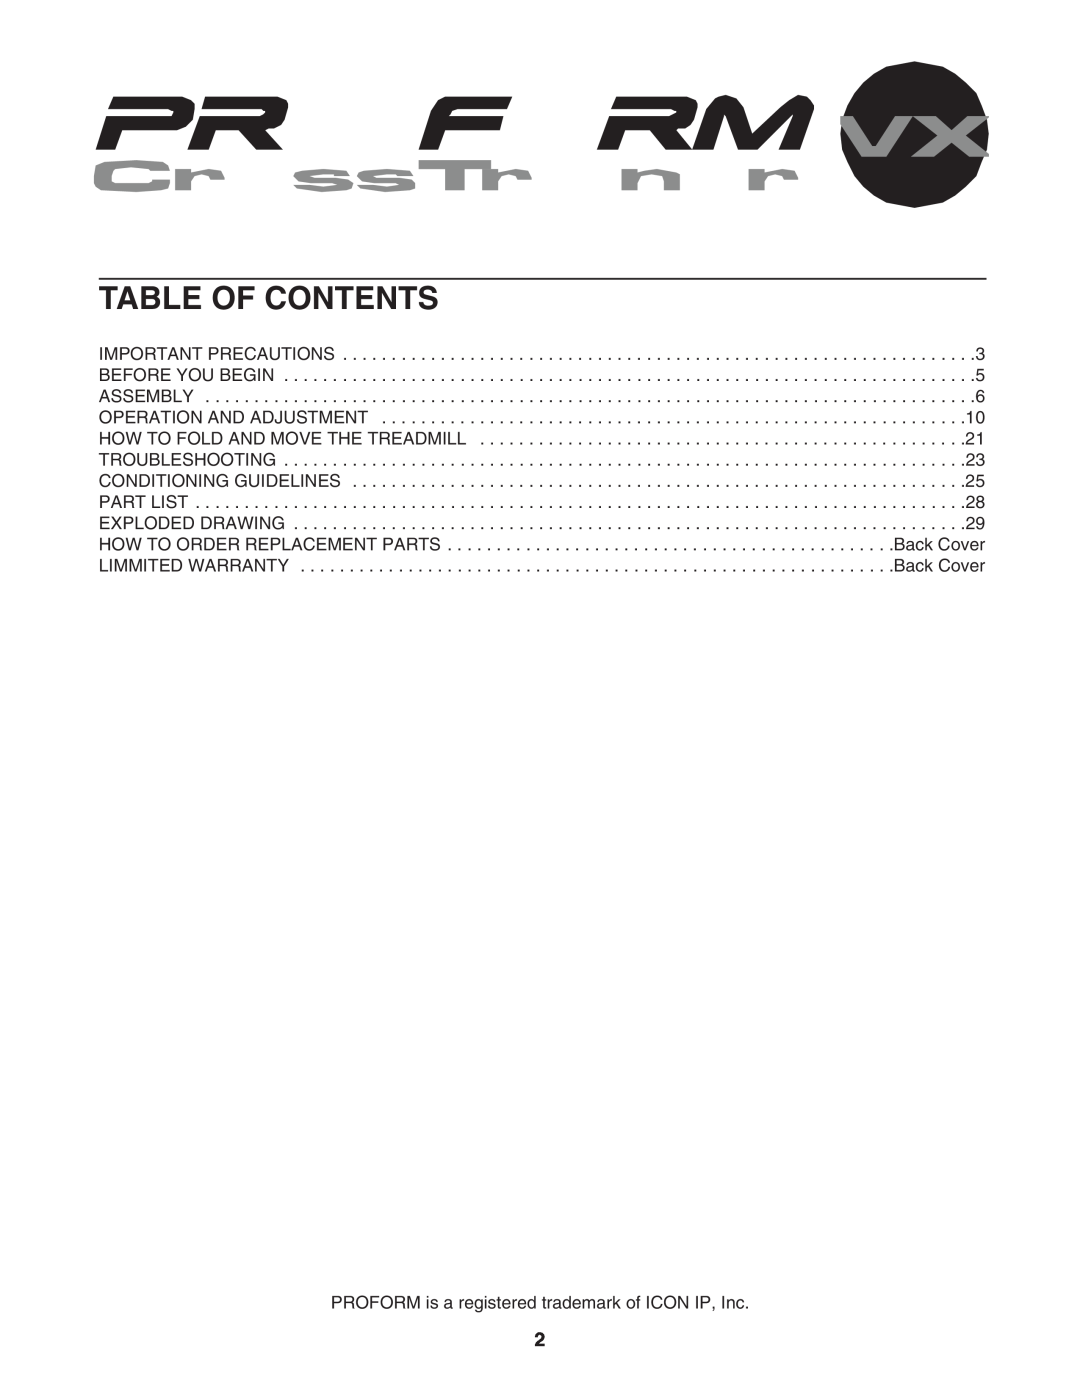 ProForm DTL4495C.0 user manual Table Of Contents, PROFORM is a registered trademark of ICON IP, Inc 